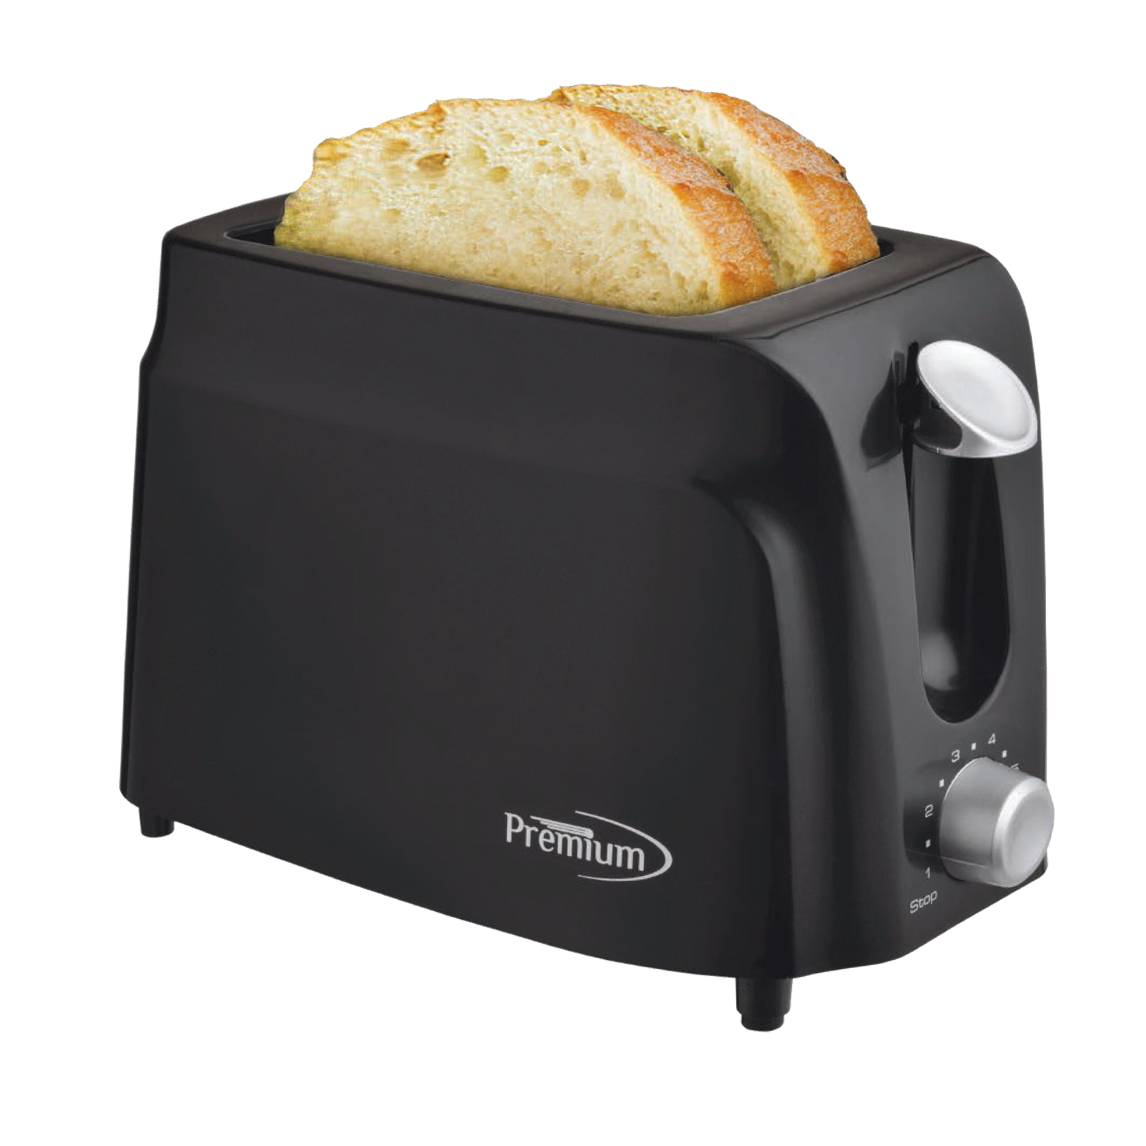 Premium 2 Slice Black Toaster Cool touch housing Adjustable browning levels 750W